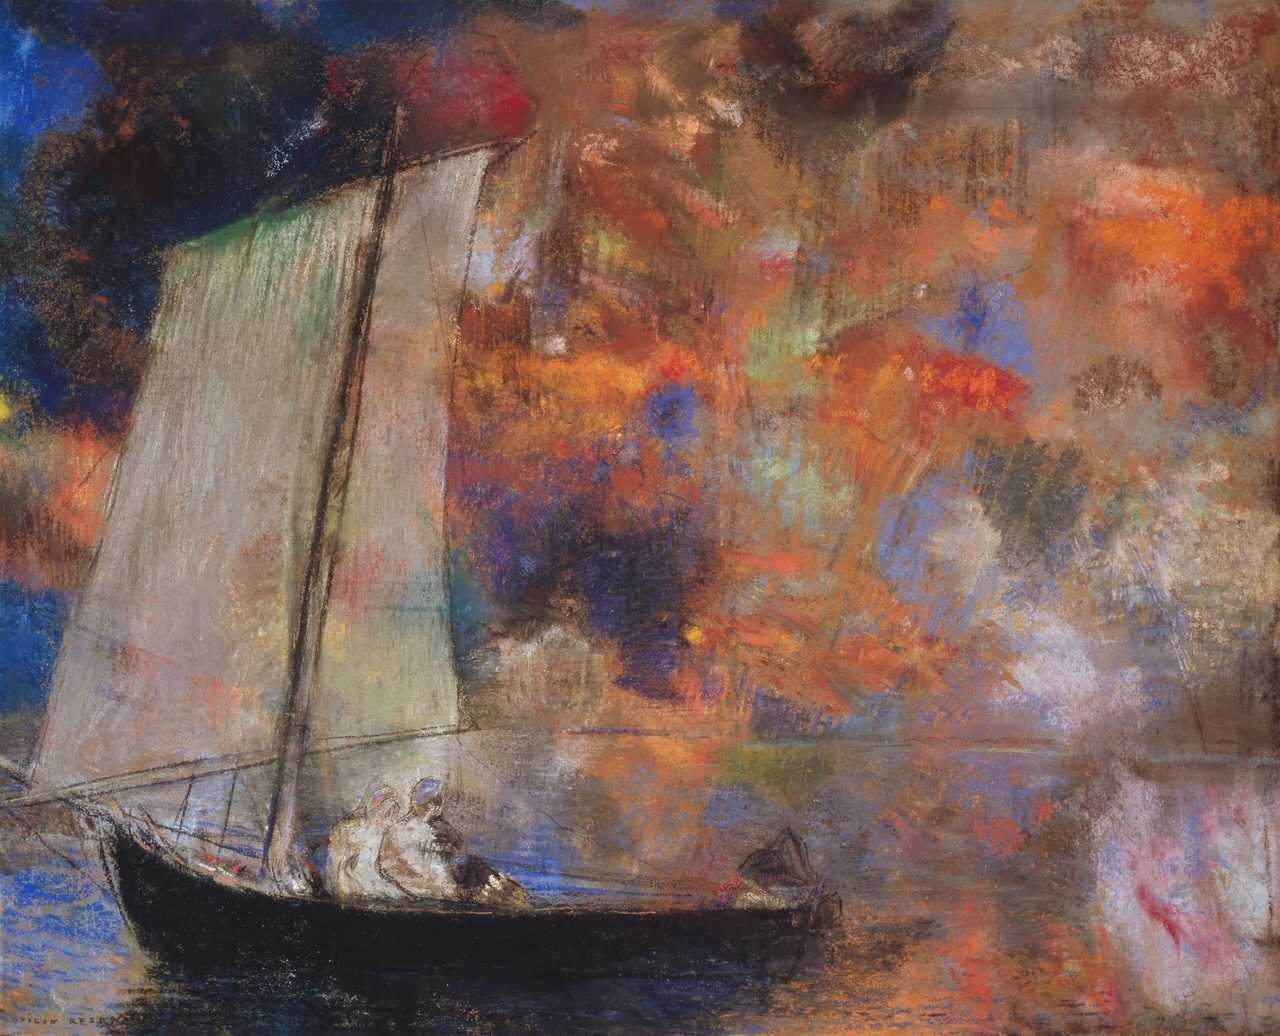 Flower Clouds, 1903, Odilon Redon (article on emotions)